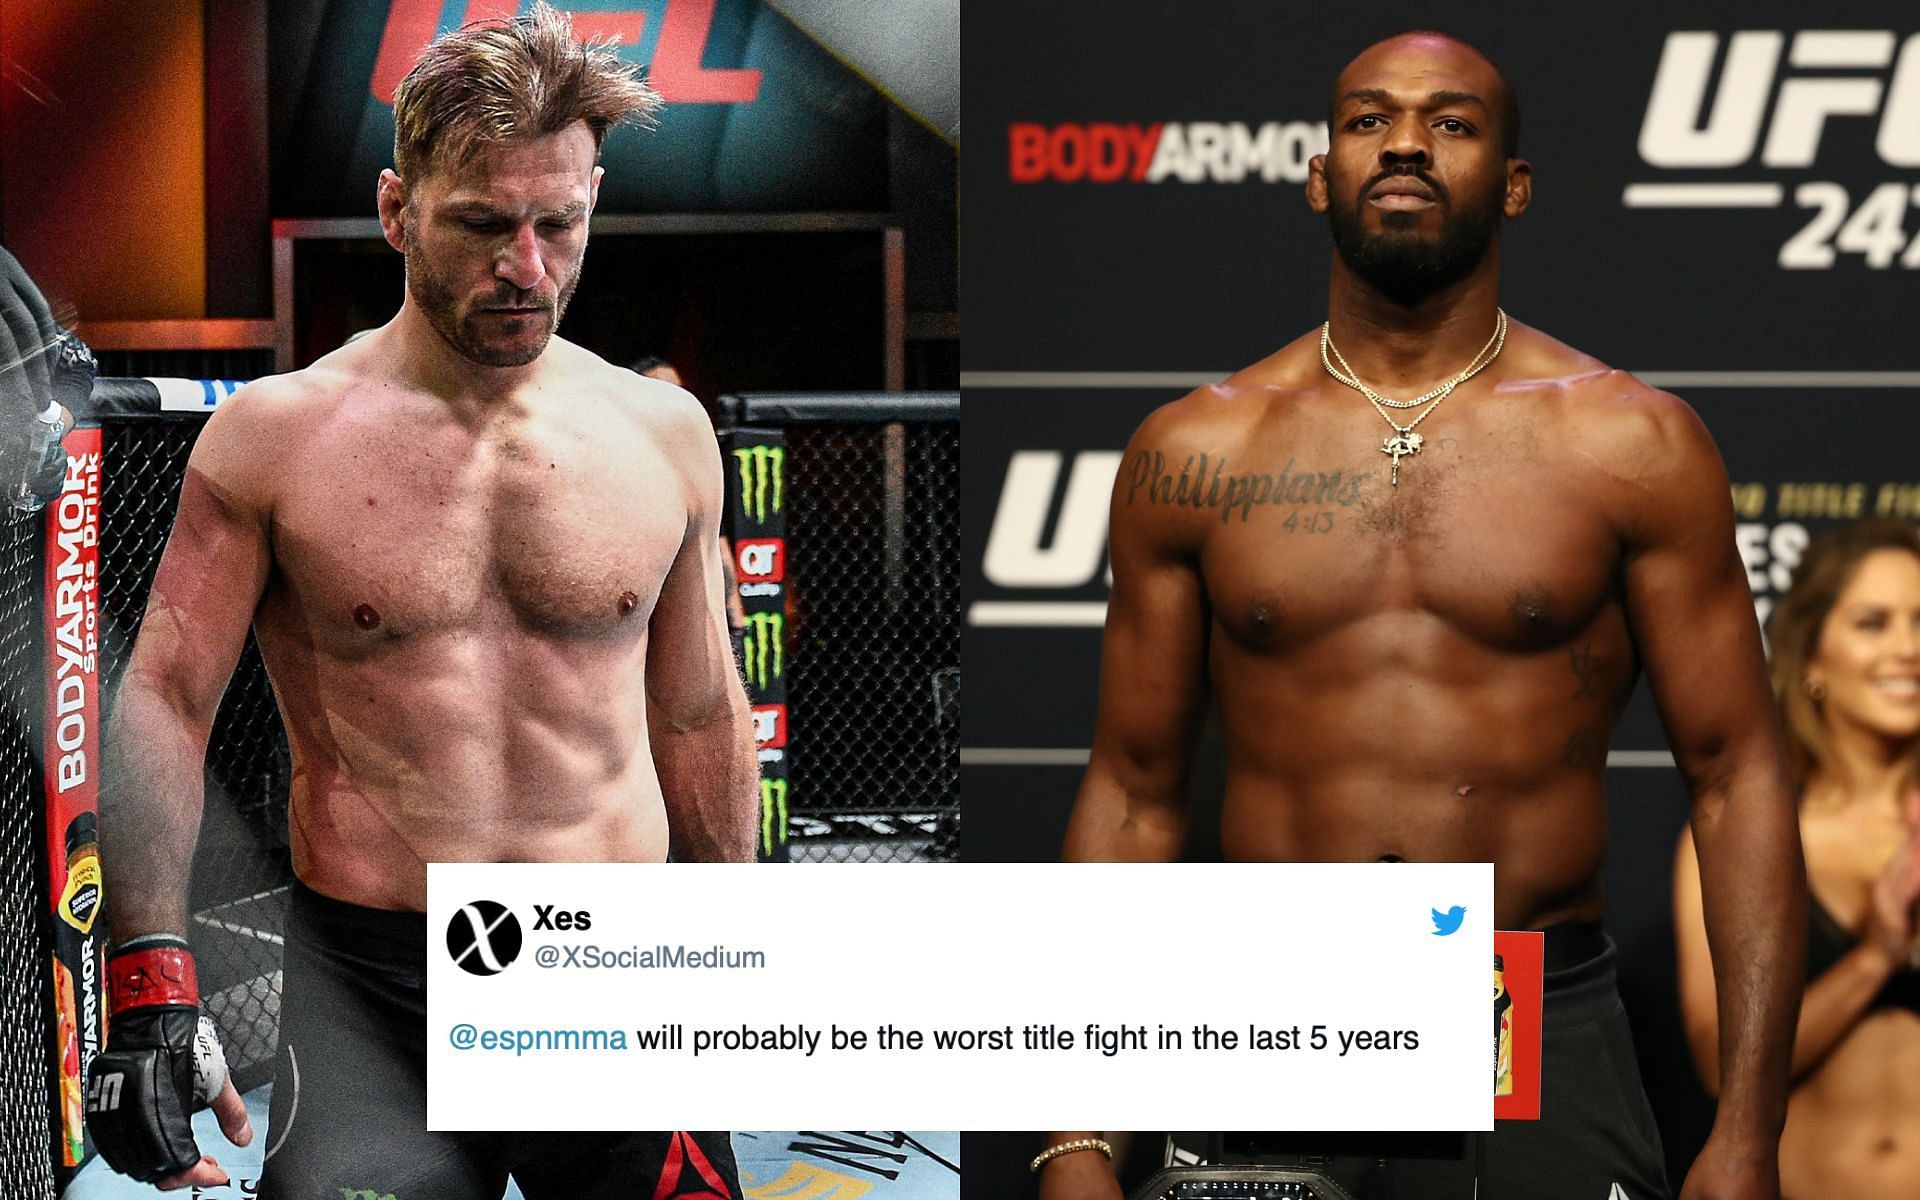 Stipe Miocic and Jon Jones [Image Credits: Getty Images and @espnmma on Twitter]